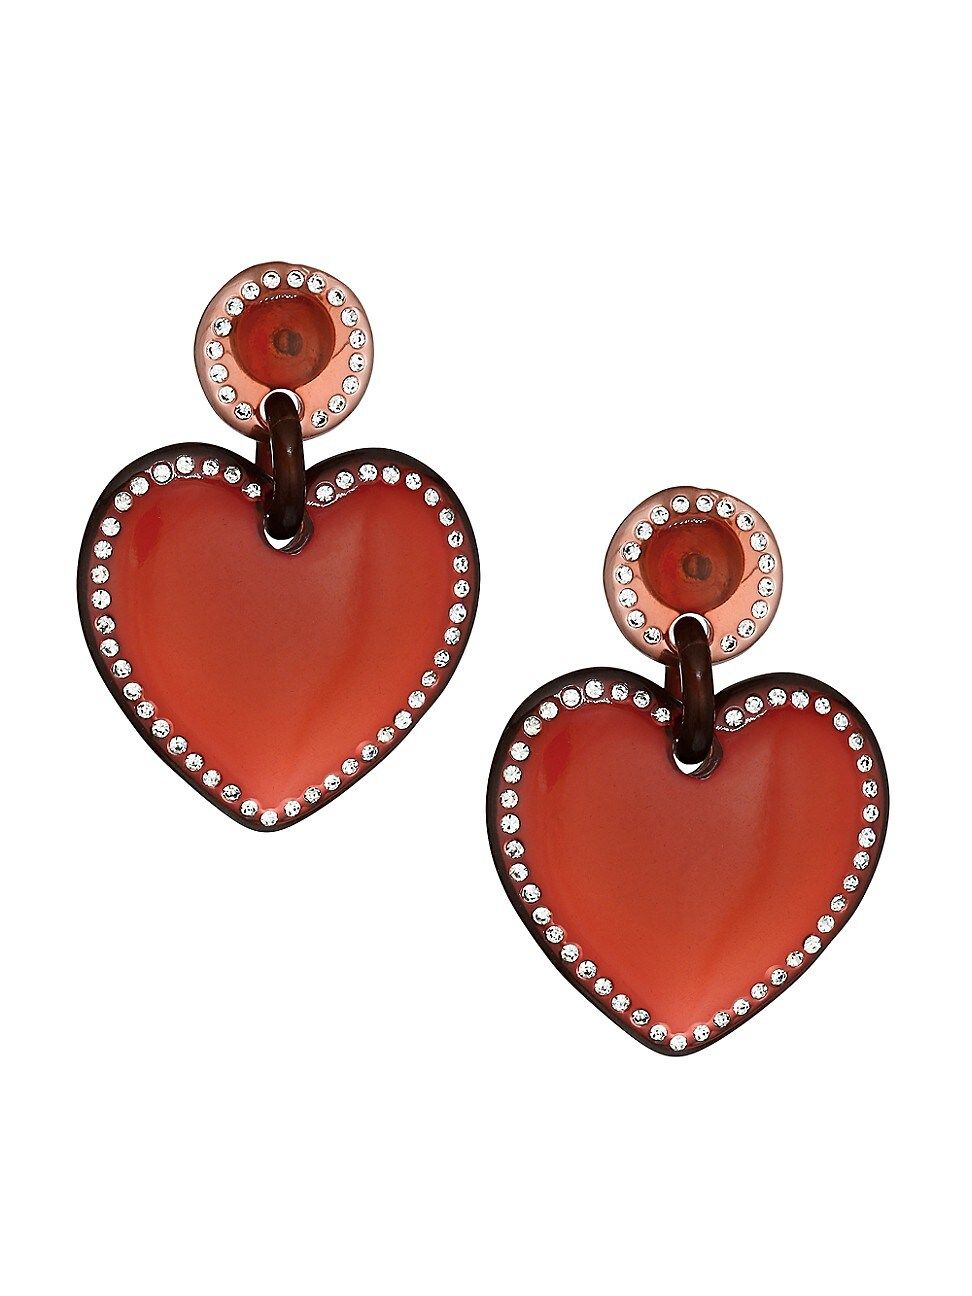 Lele Sadoughi Women's Jeweled-Stitched Red Heart Drop Earrings - Brown | Saks Fifth Avenue